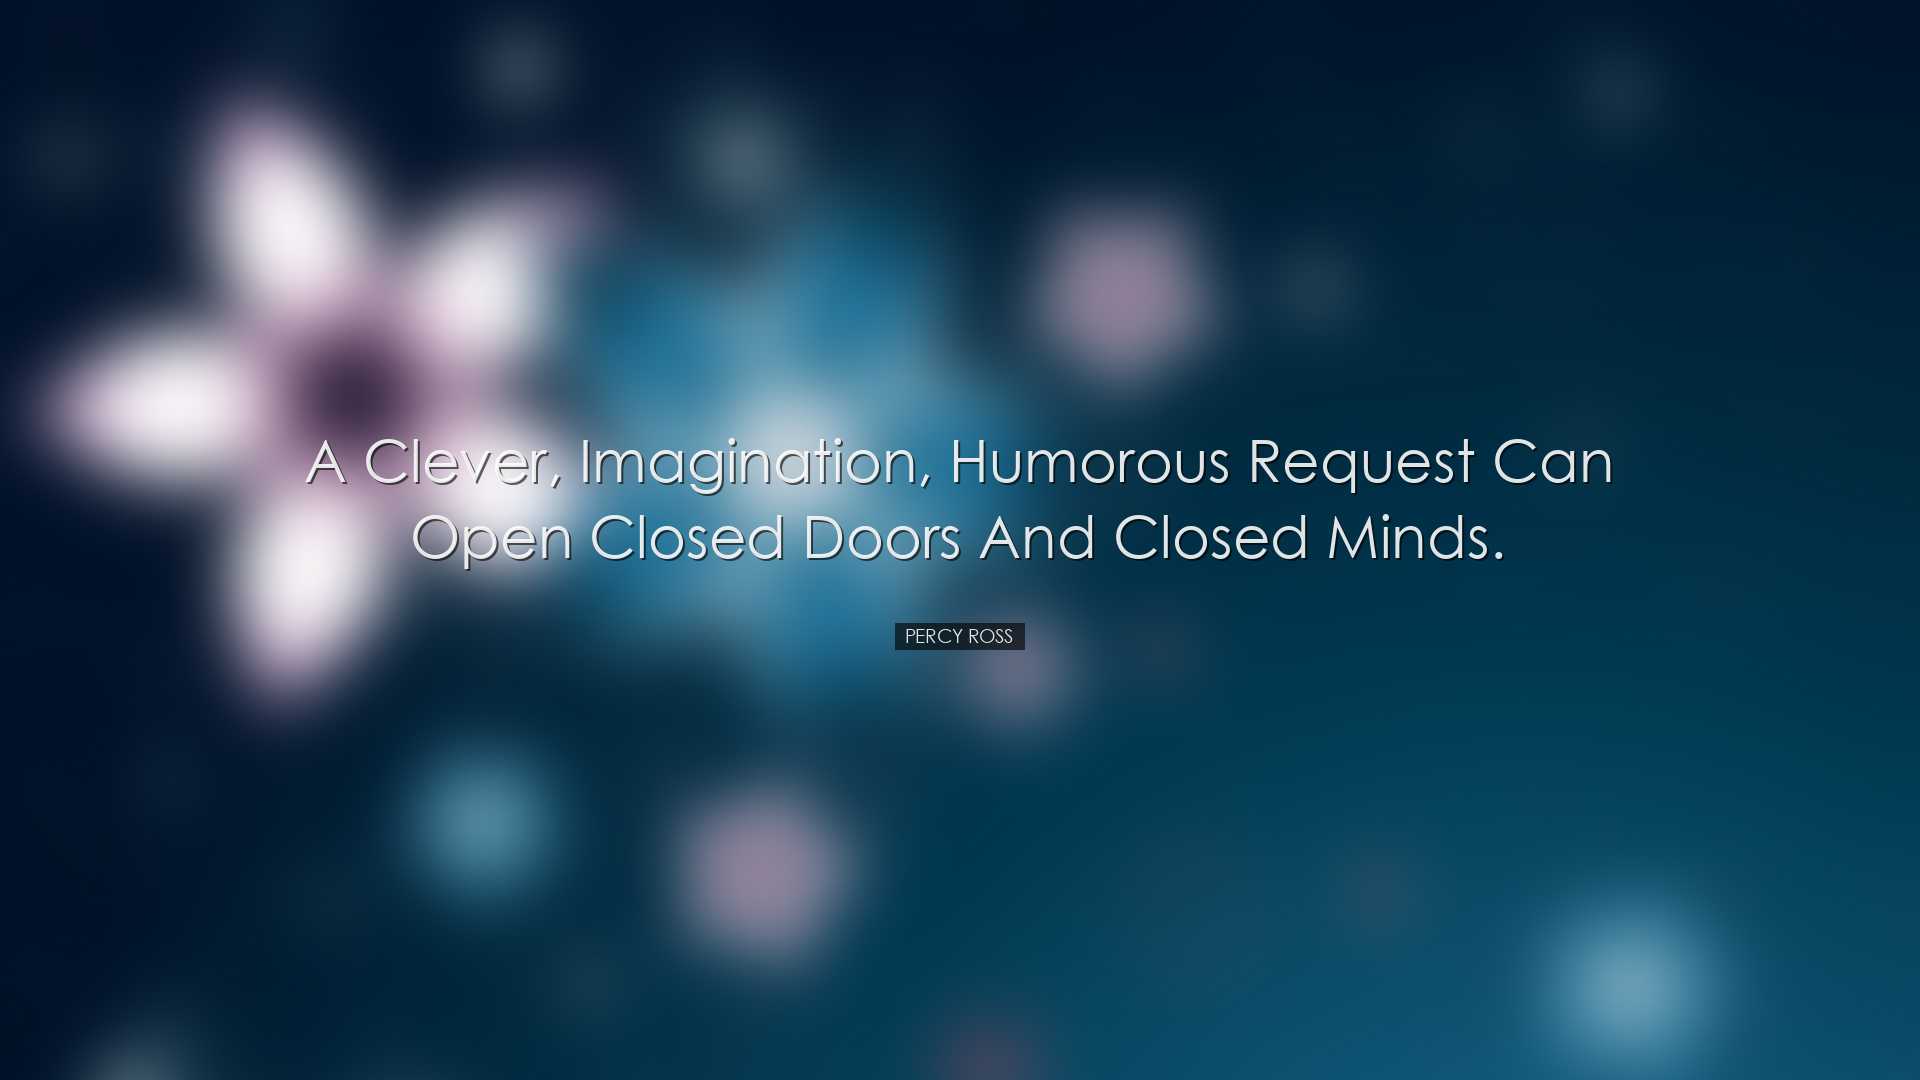 A clever, imagination, humorous request can open closed doors and